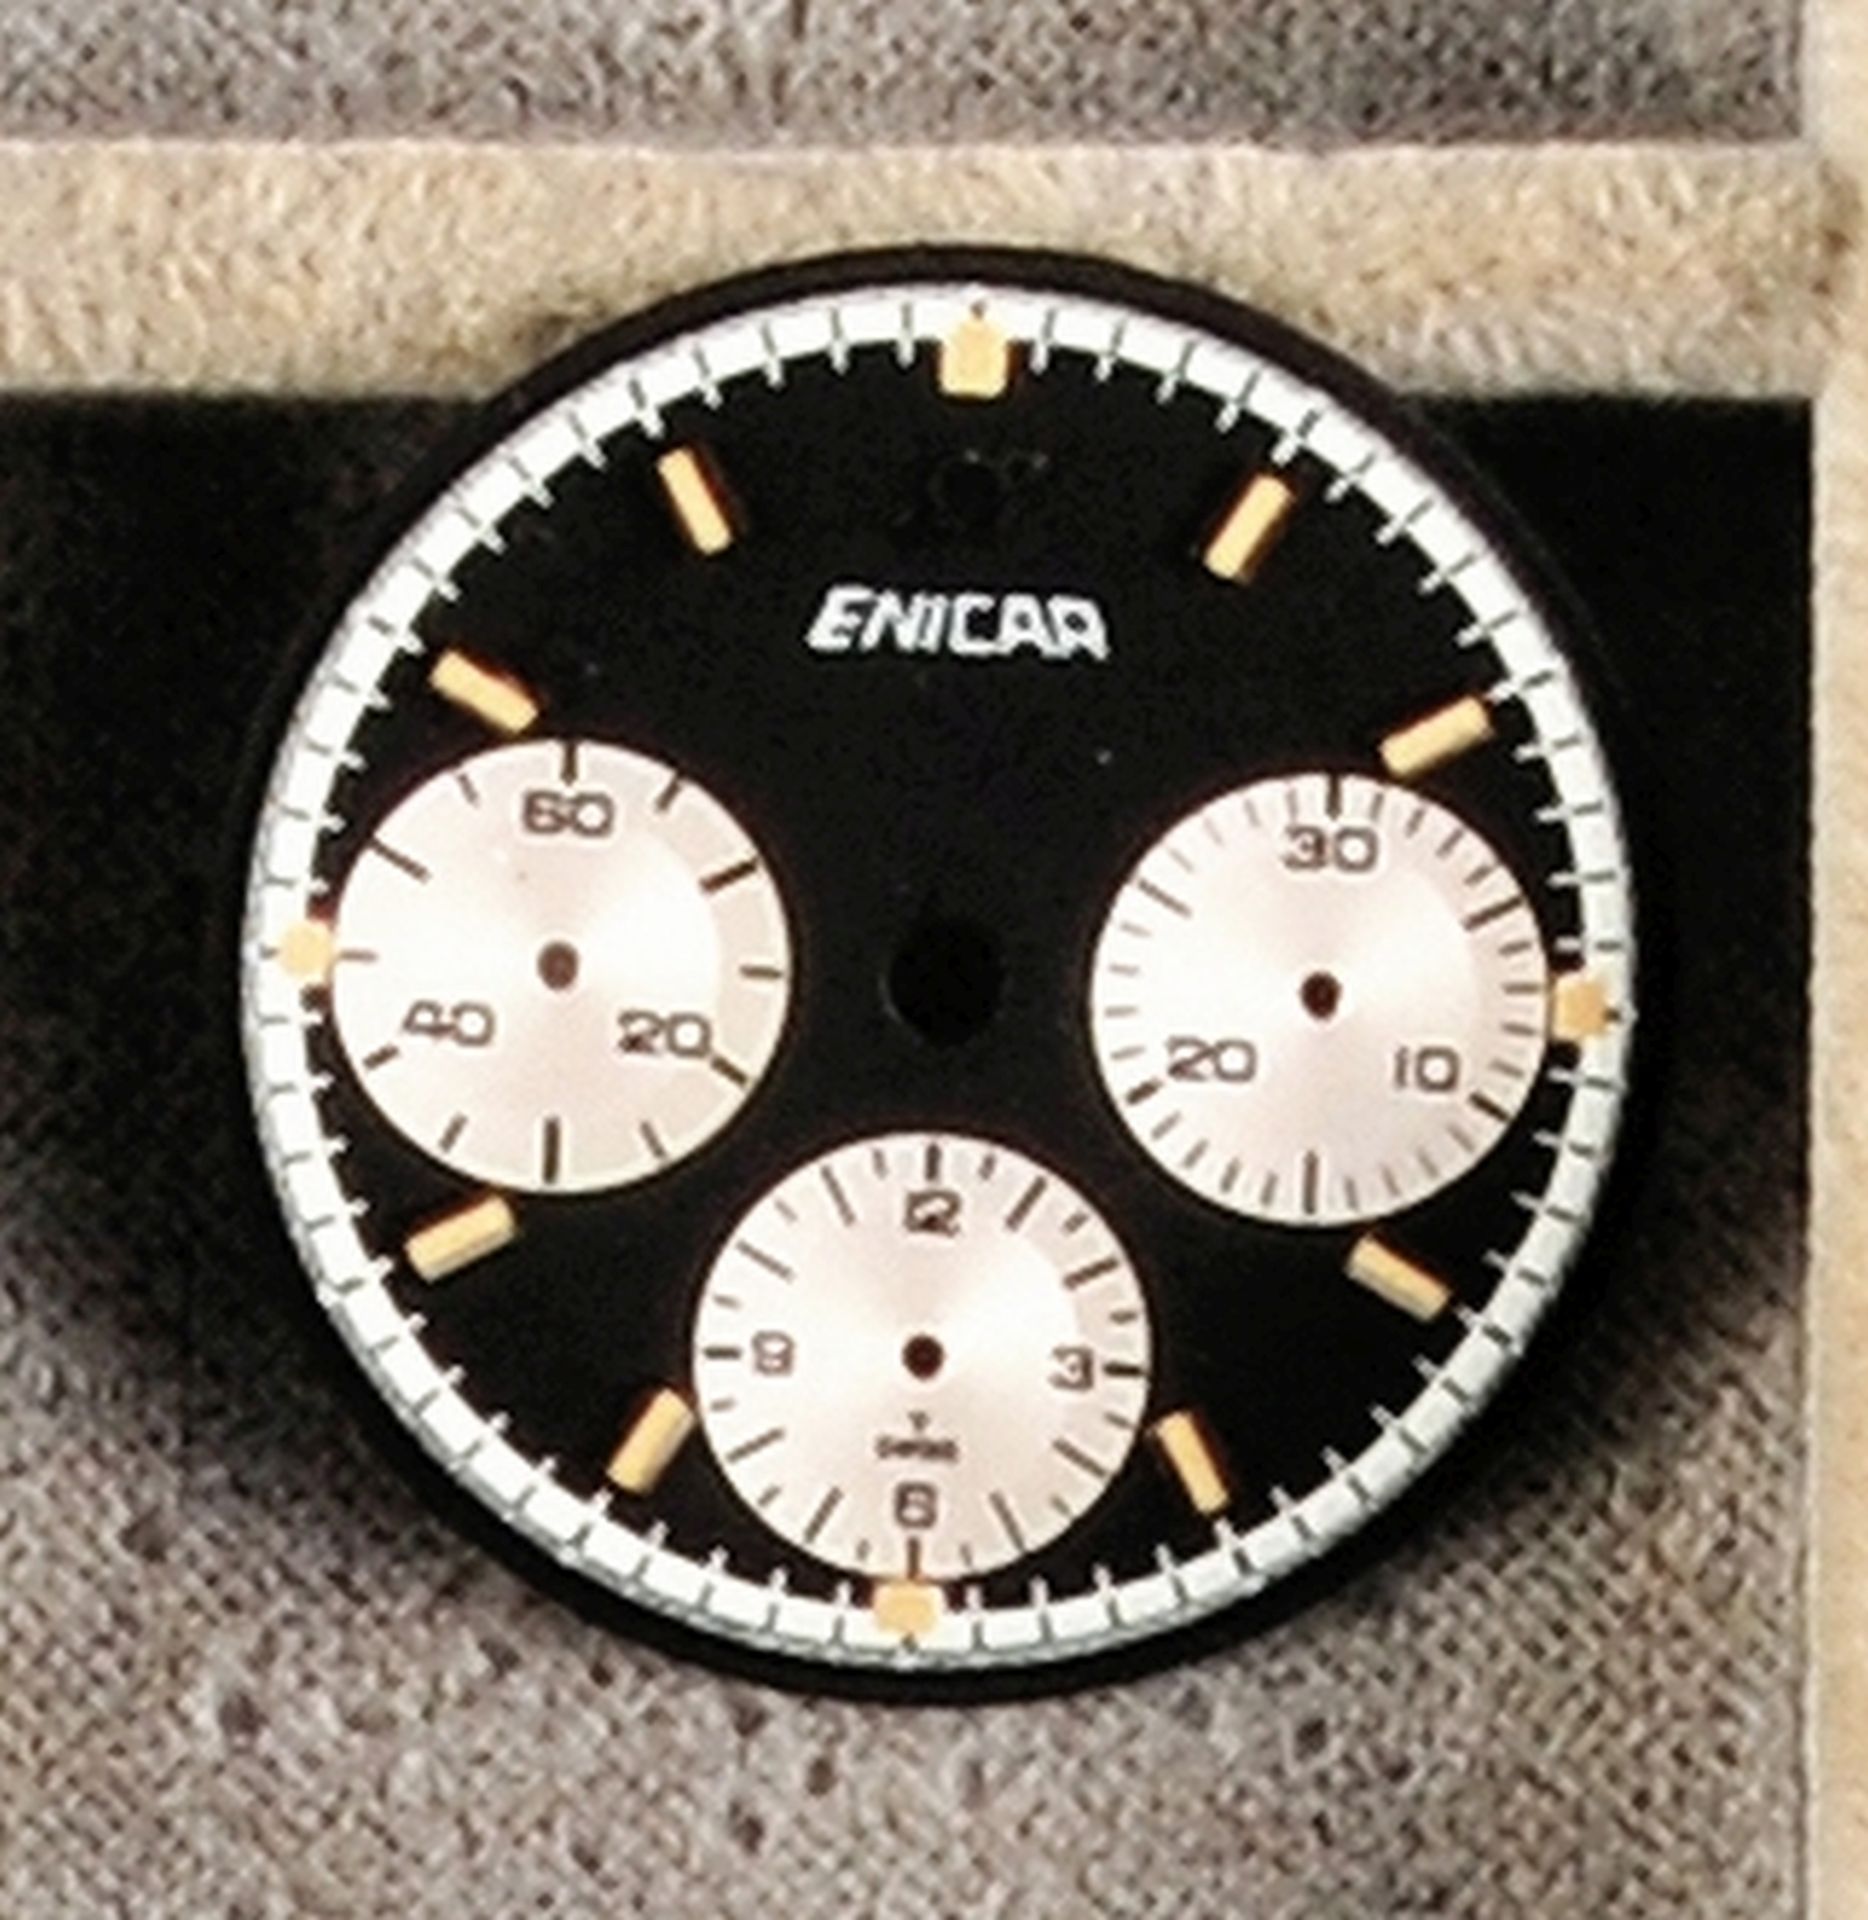 Enicar, black dial for cal. Valjoux 72 with silvered scales for small second